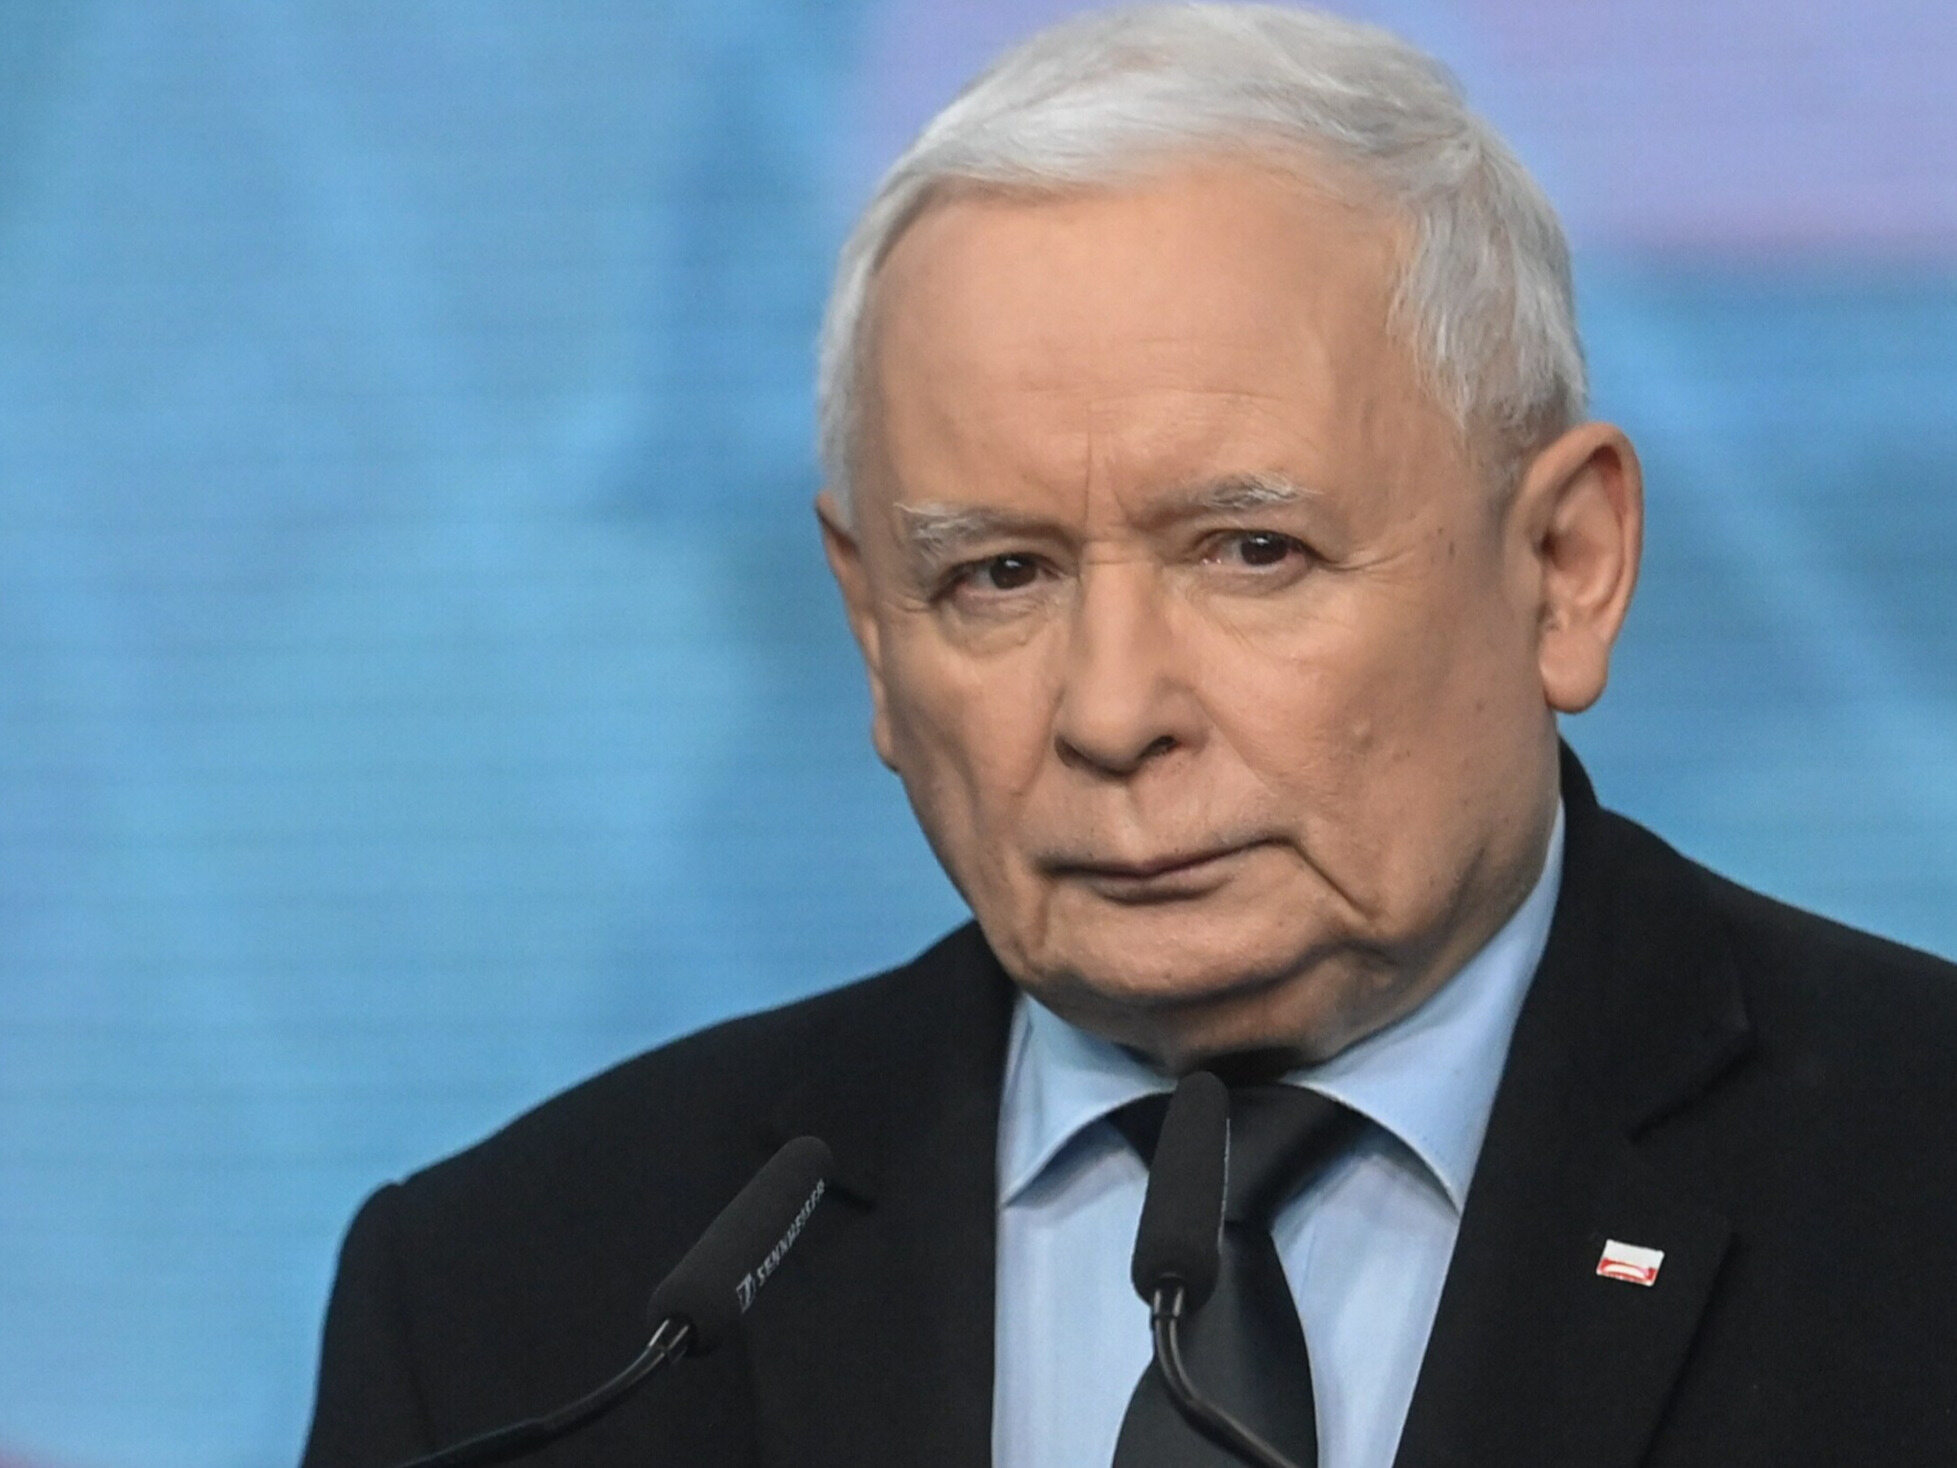 Kaczyński bitterly about the situation on the border: The point is to bow to Putin and Lukashenko from afar